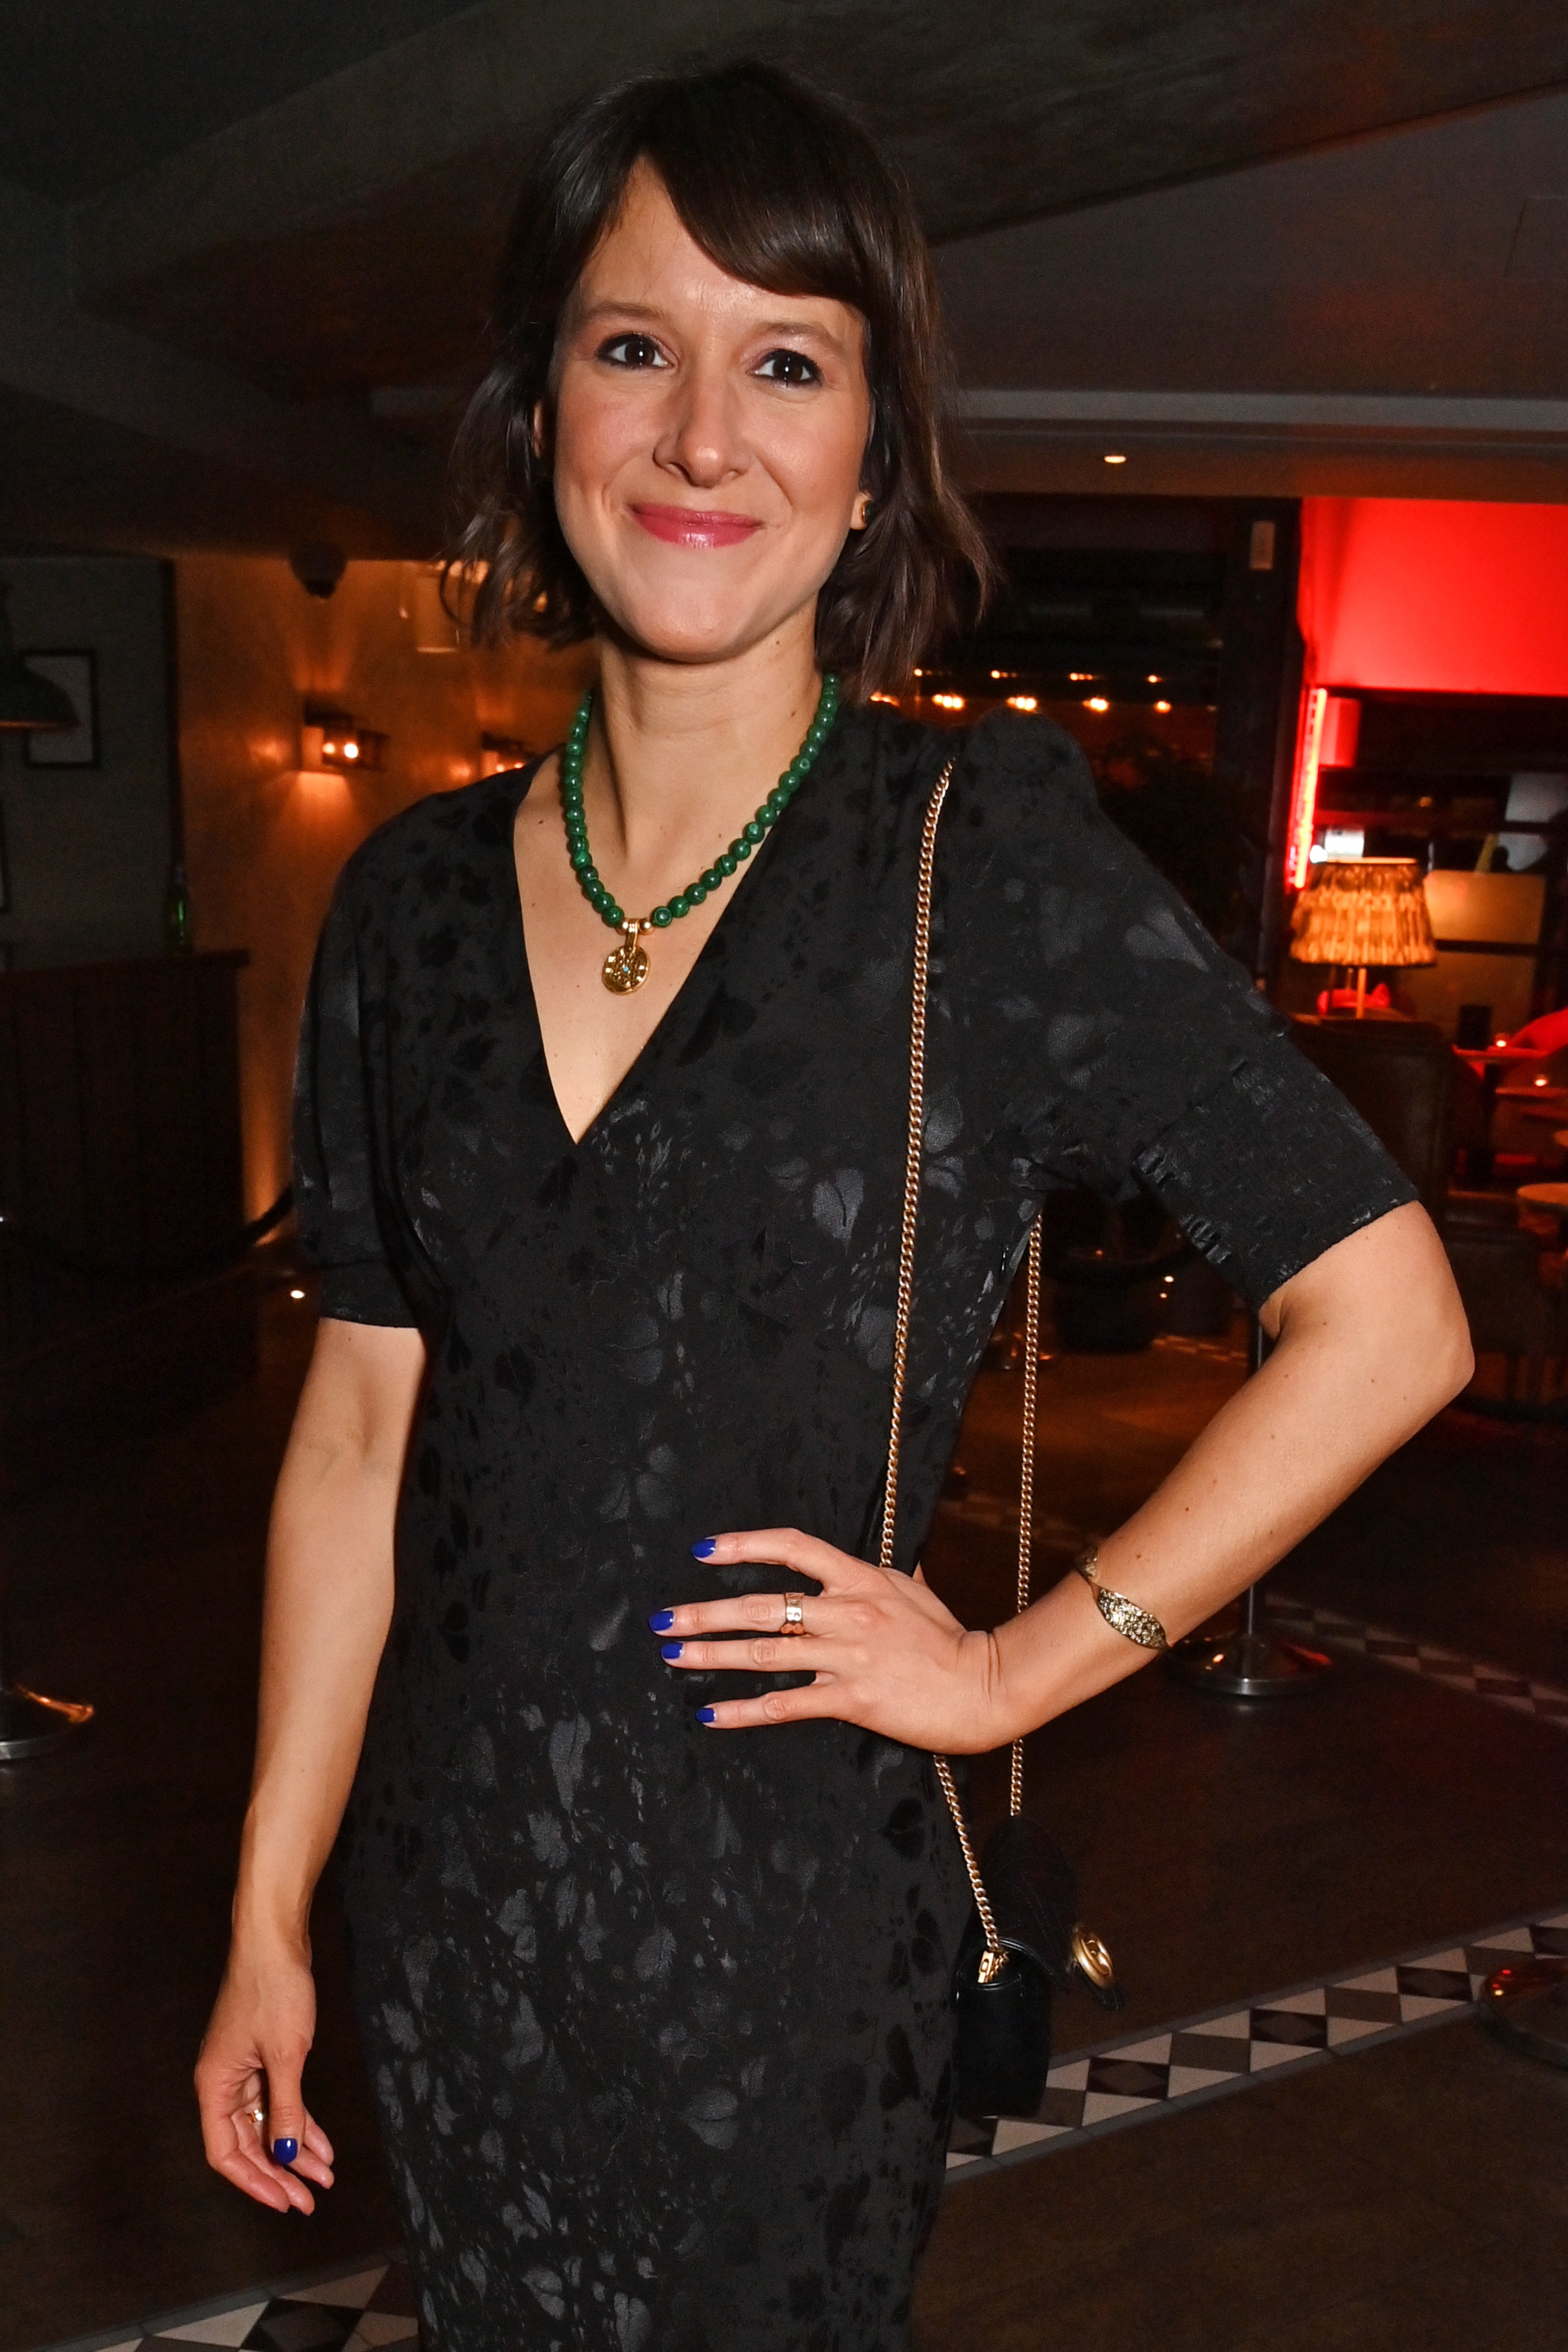 Louise Ford attends the press night after party for the new cast of "2:22 A Ghost Story" at 100 Wardour St on February 1, 2023 in London, England